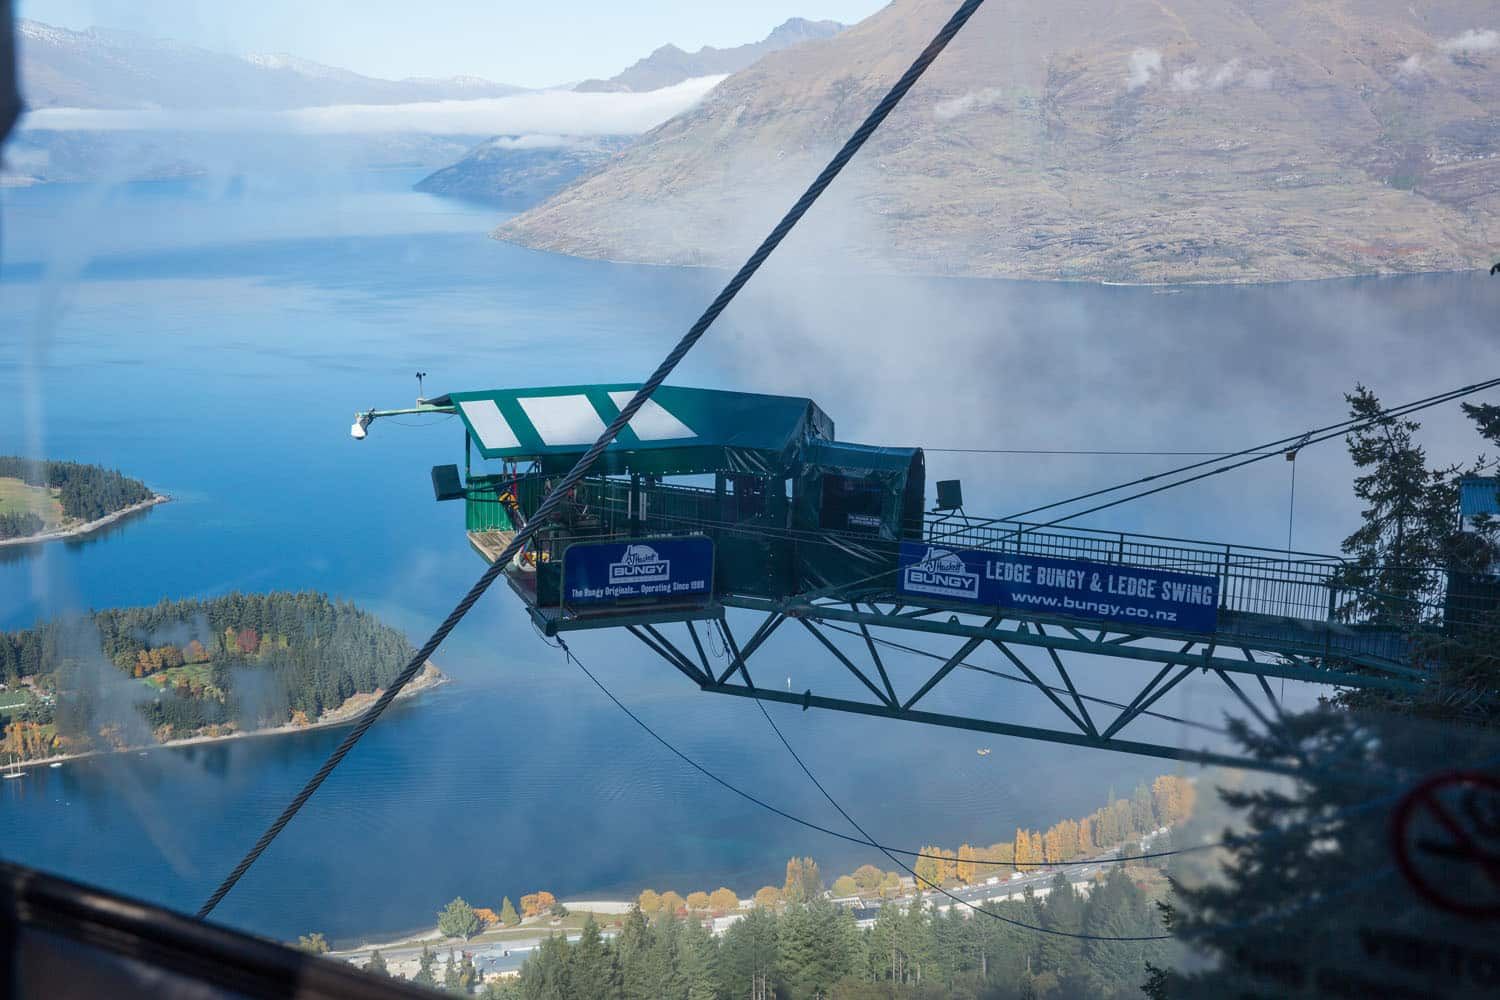 The Ledge Bungy | Best Things to Do in Queenstown